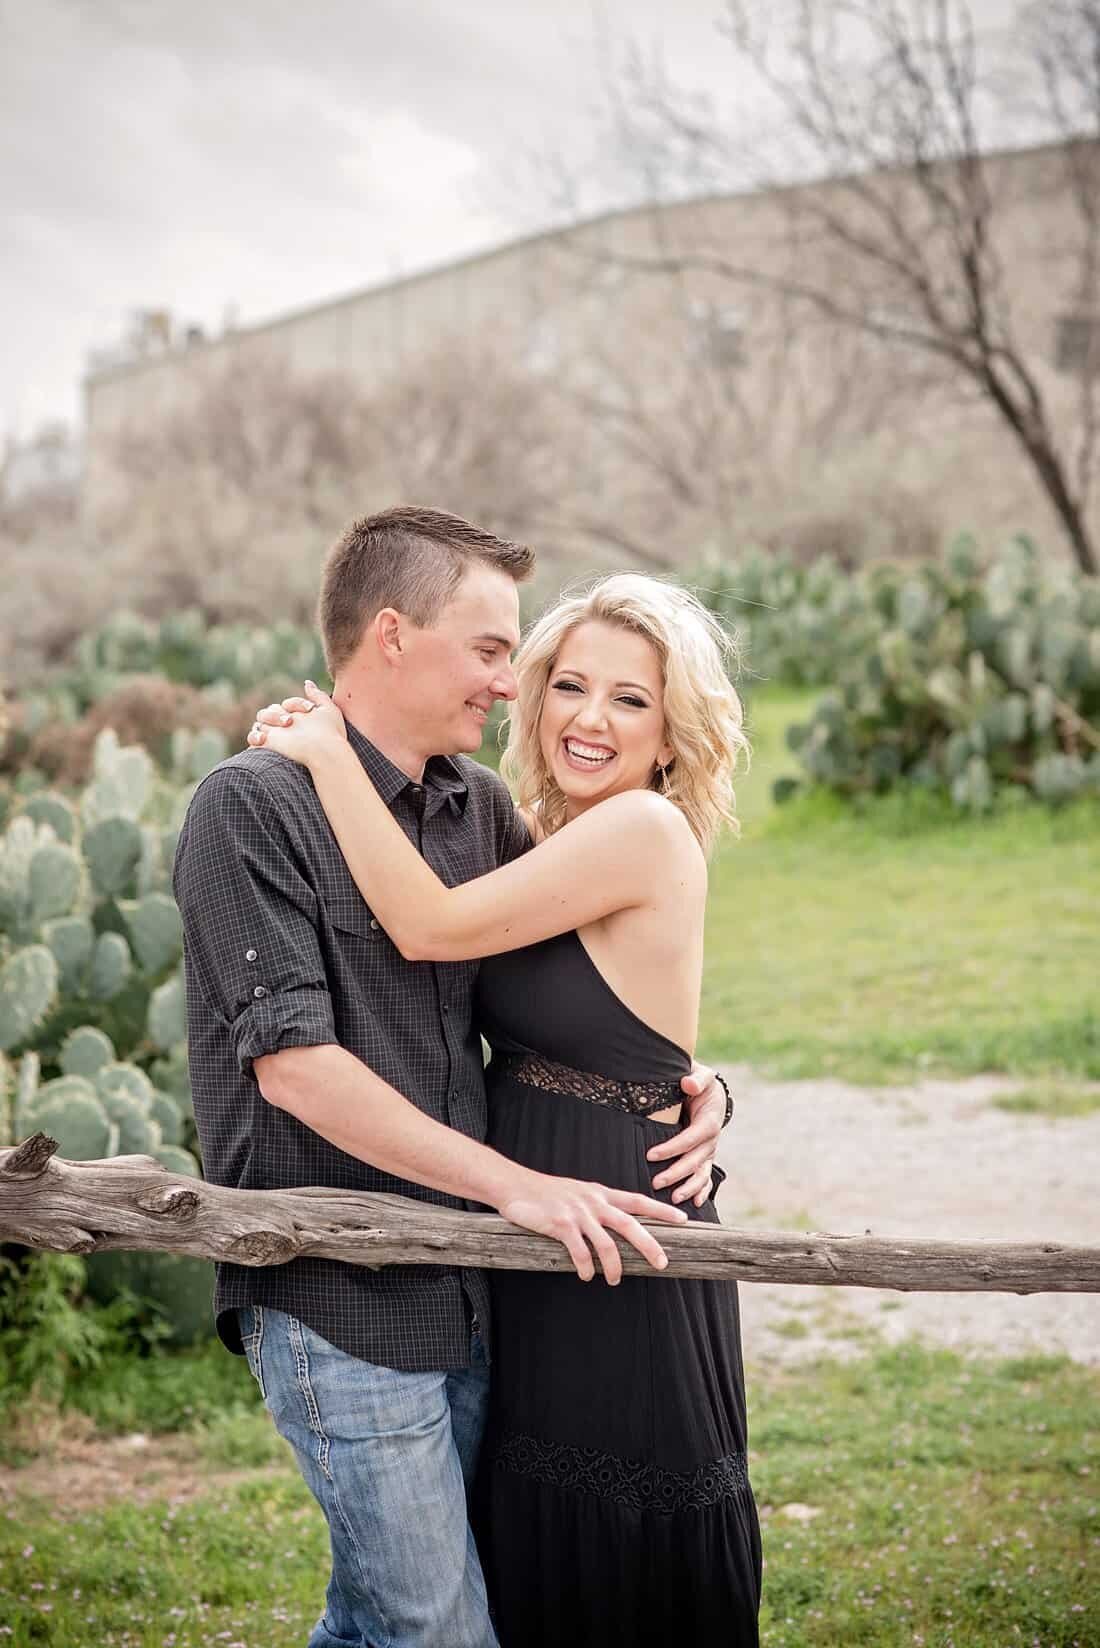 stansell_engagement003_WEB